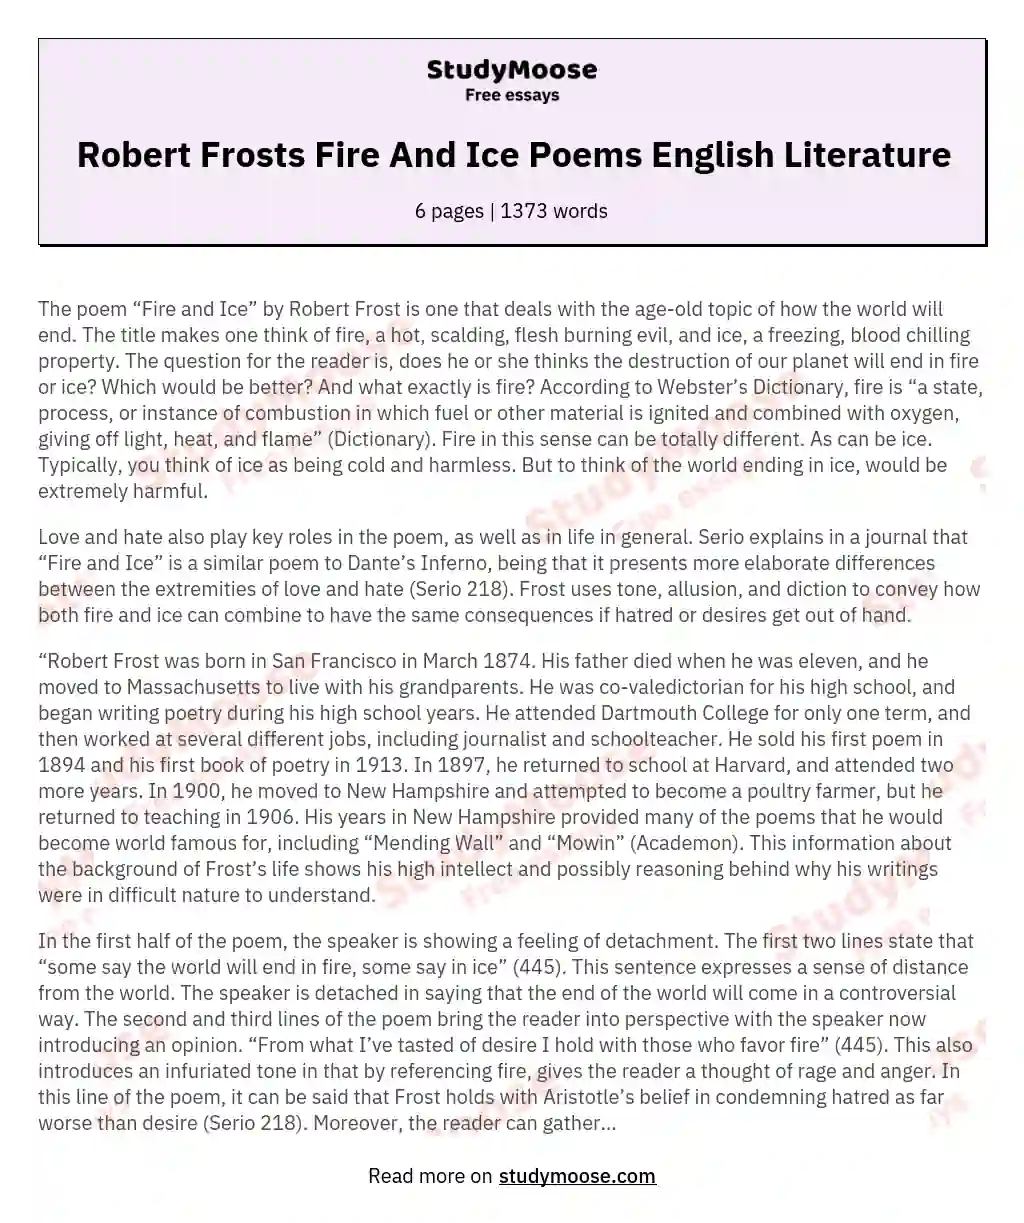 Robert Frosts Fire And Ice Poems English Literature essay